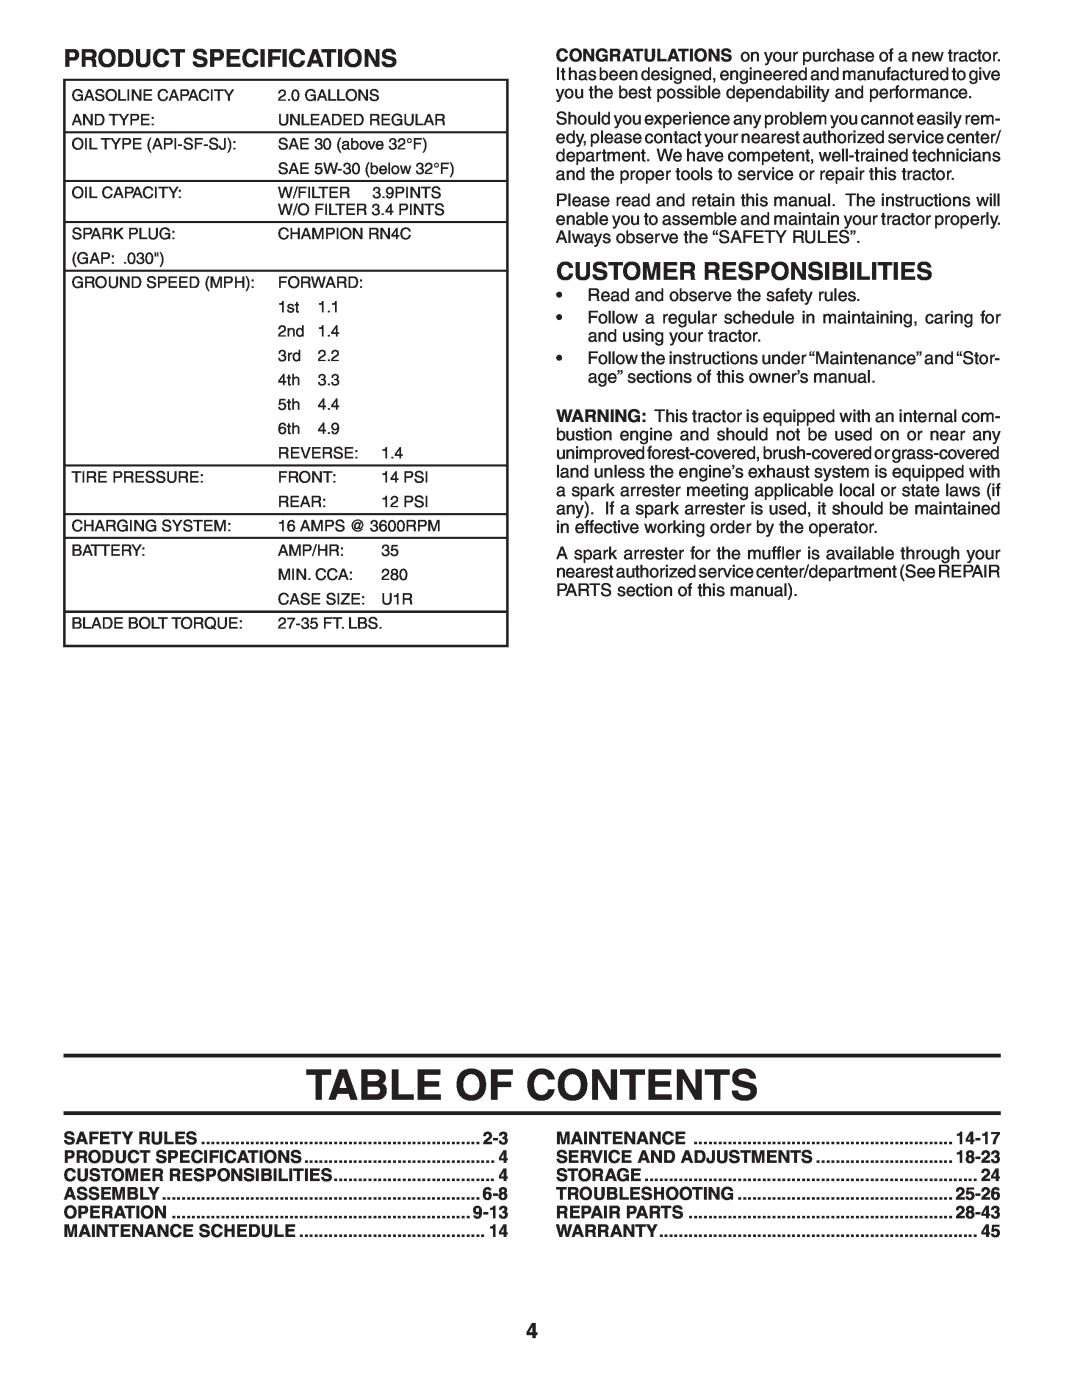 Weed Eater 191087 manual Table Of Contents, Product Specifications, Customer Responsibilities 